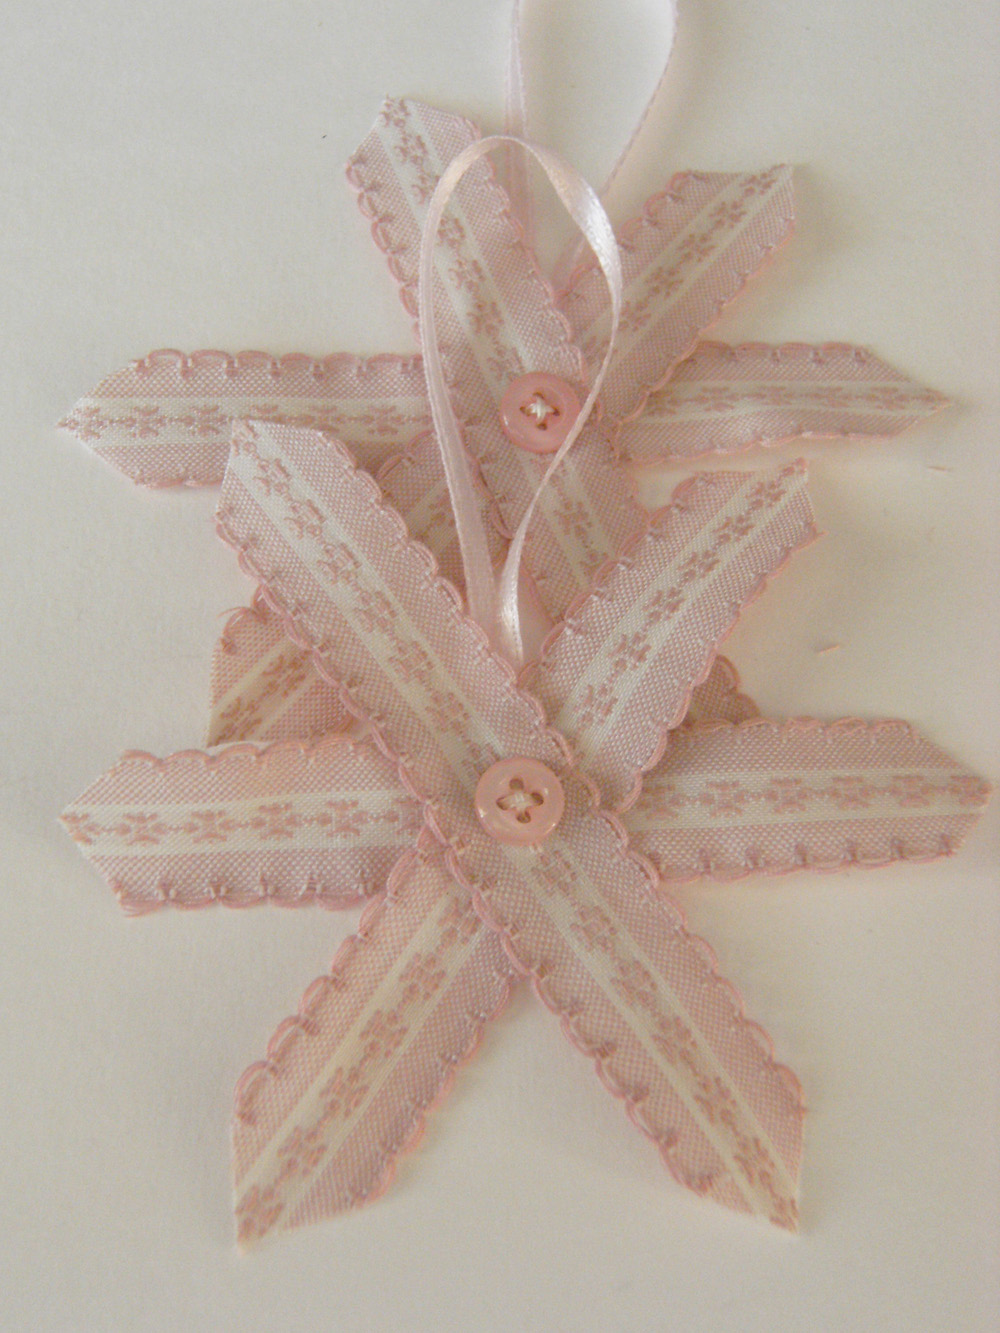 Vintage Pink Ticking Ribbon Stars For Decor, Gift Wrap Or Paper Crafts